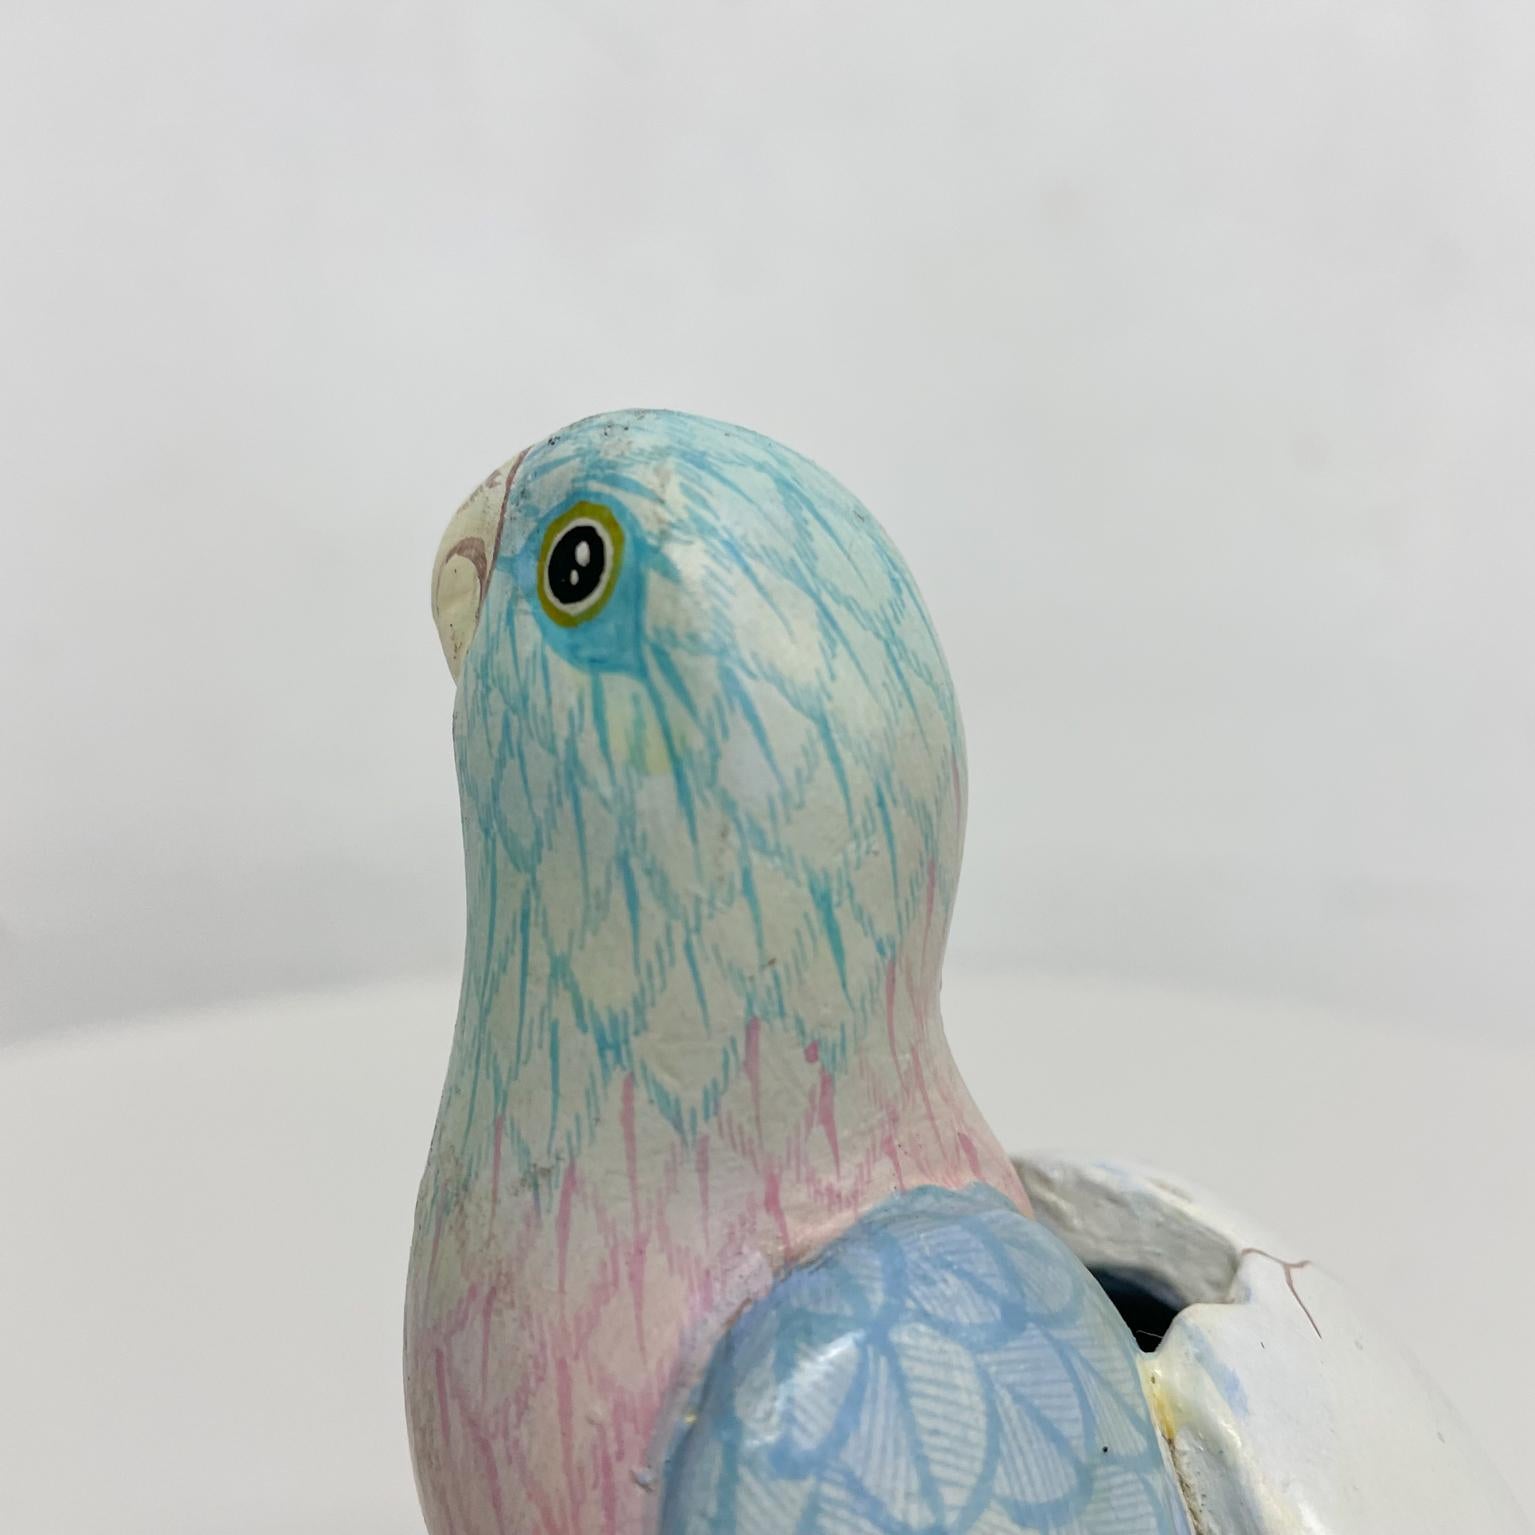 Late 20th Century Pretty Parrot Egg Hatching Ceramic Art Sculpture Mexico Sergio Bustamante 1980s